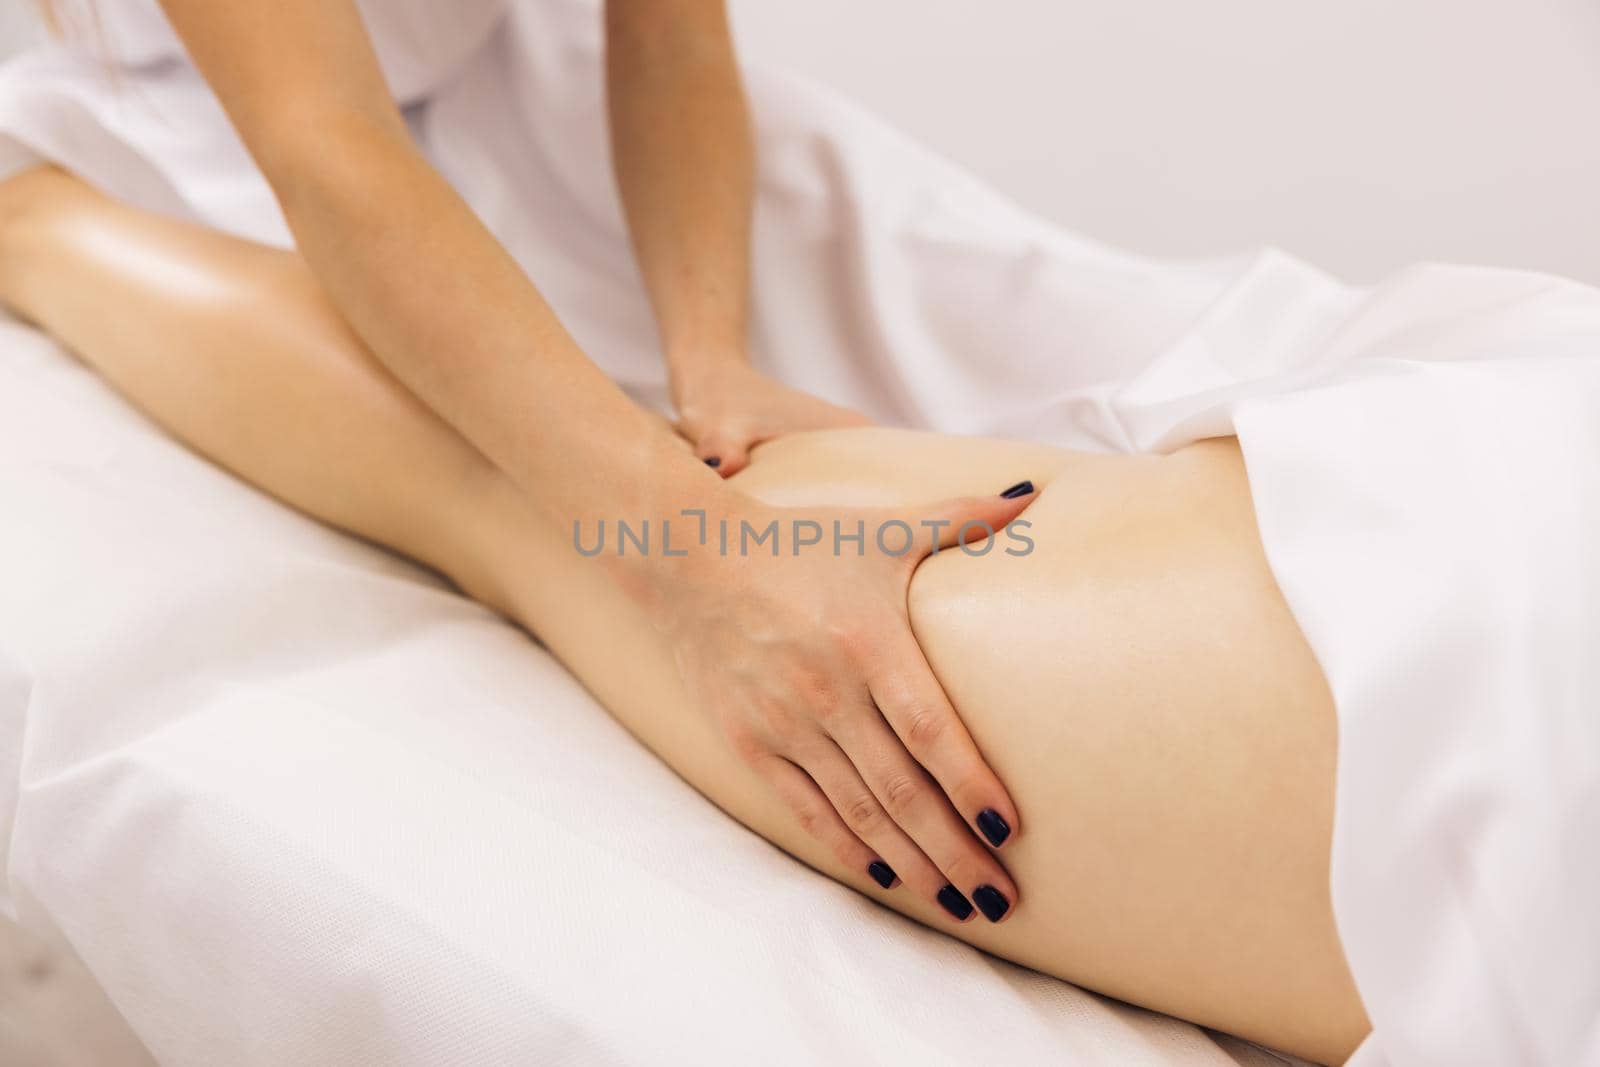 Masseur is doing massage of back of woman lying in beauty salon. Professional is massaging and touching skin of female client, using traditional techniques. Specialist works with body of patient